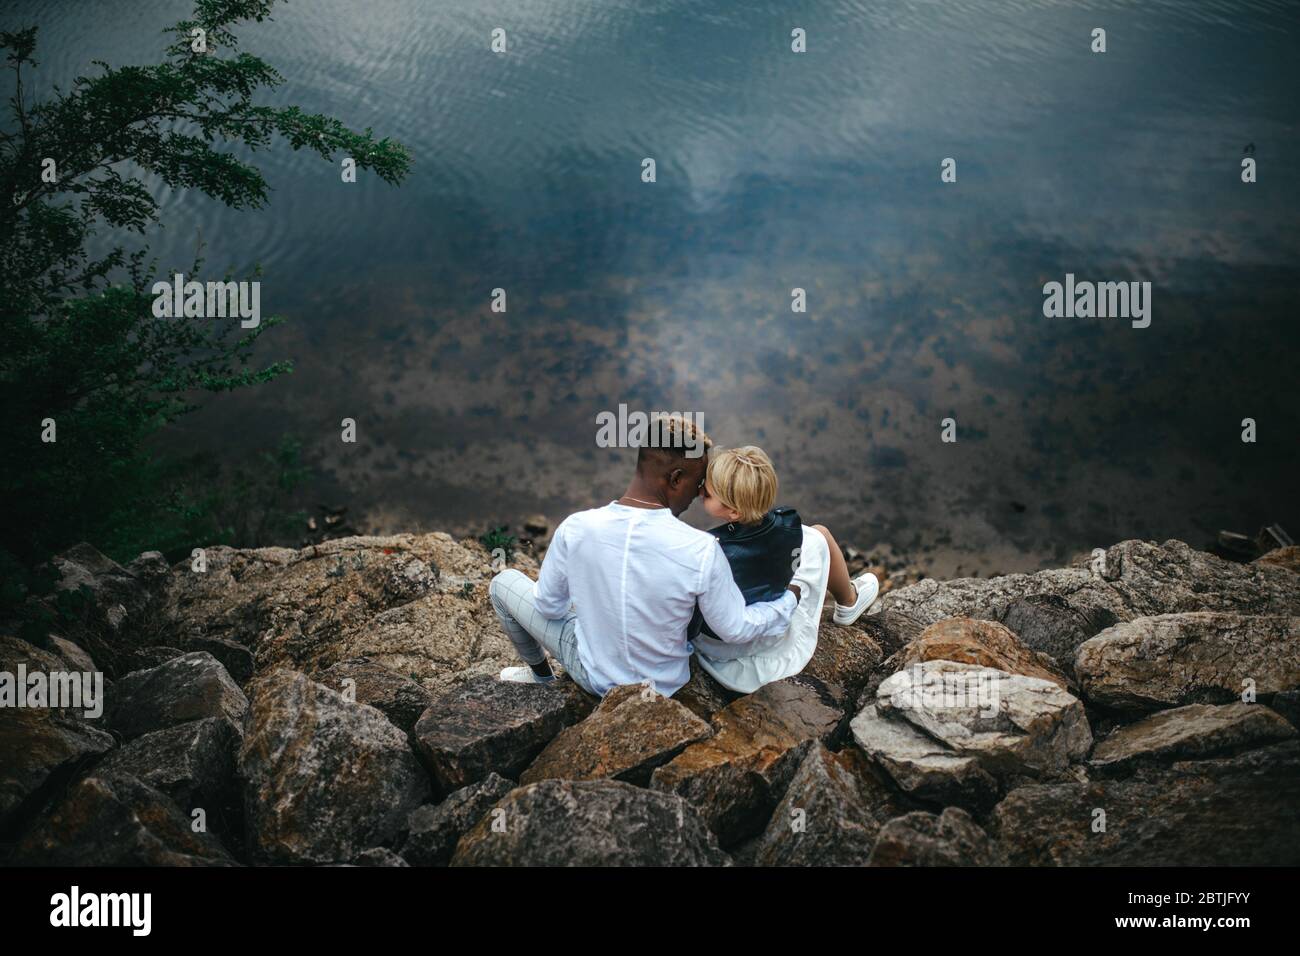 Interracial couple sits on rocks and hugs against background of river. Concept of love relationships and unity between different human races. Stock Photo